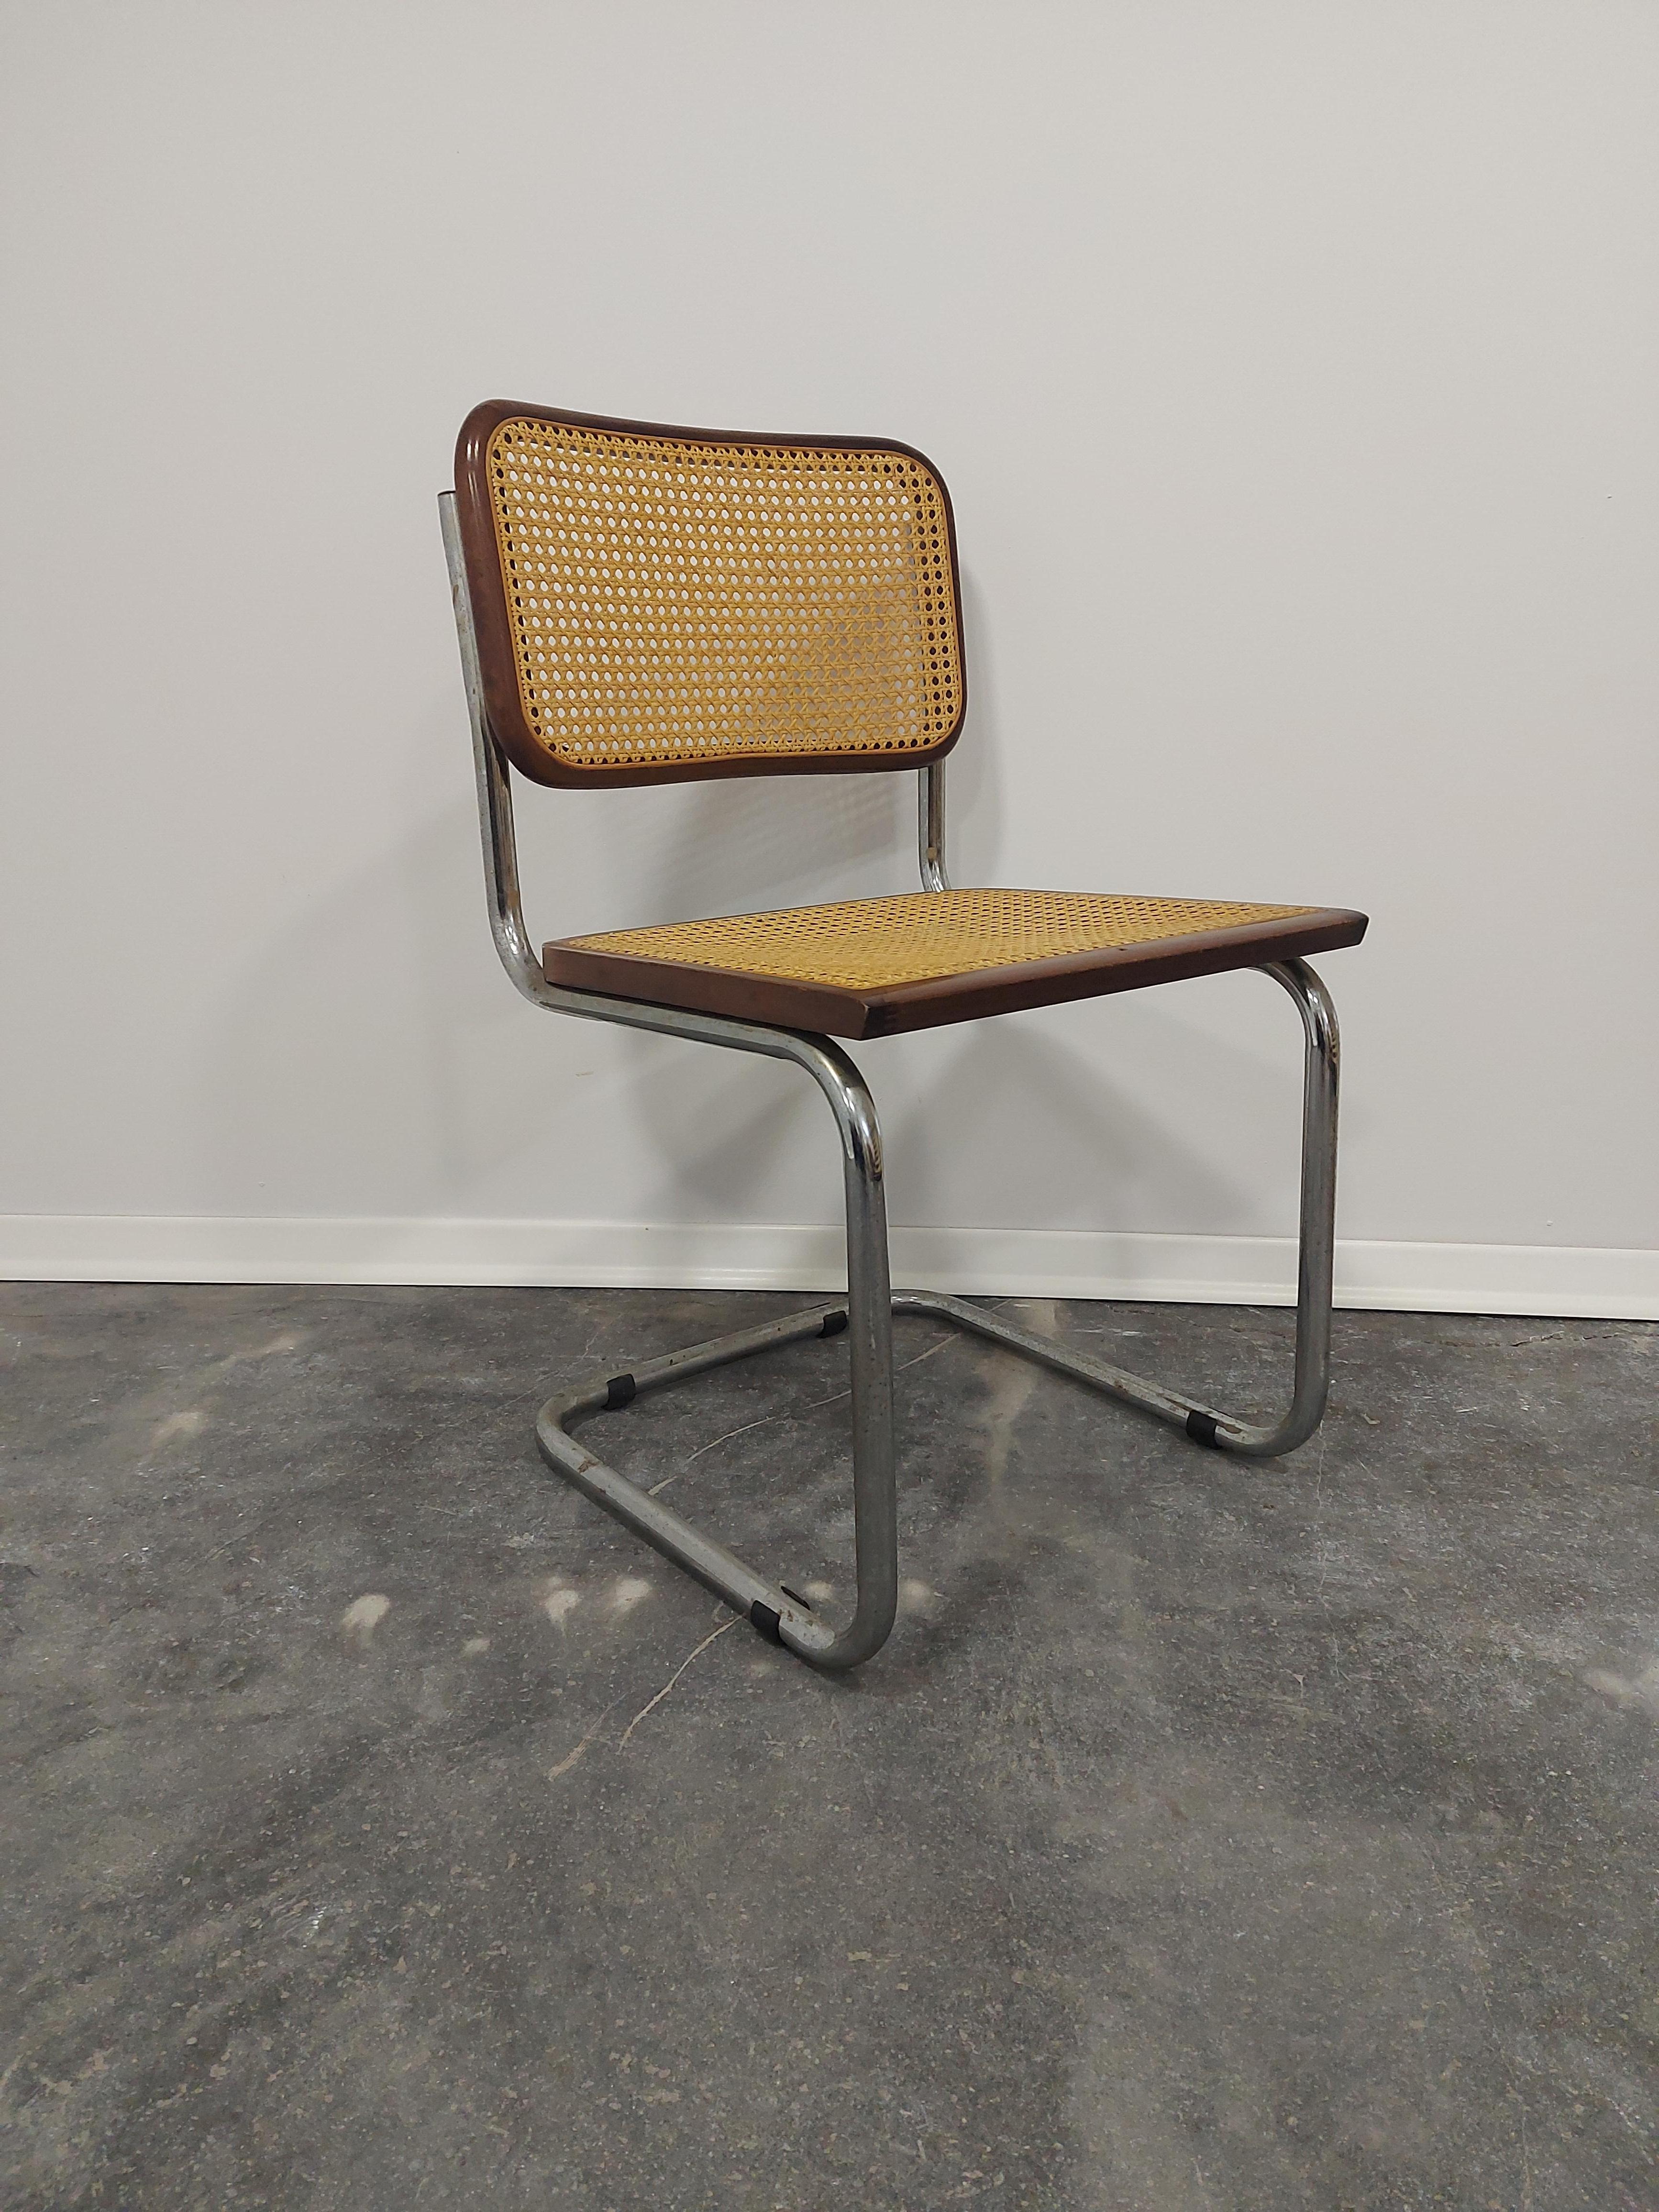 Late 20th Century Cesca Chair by Marcel Breuer 1970s B32 1 of 5 For Sale